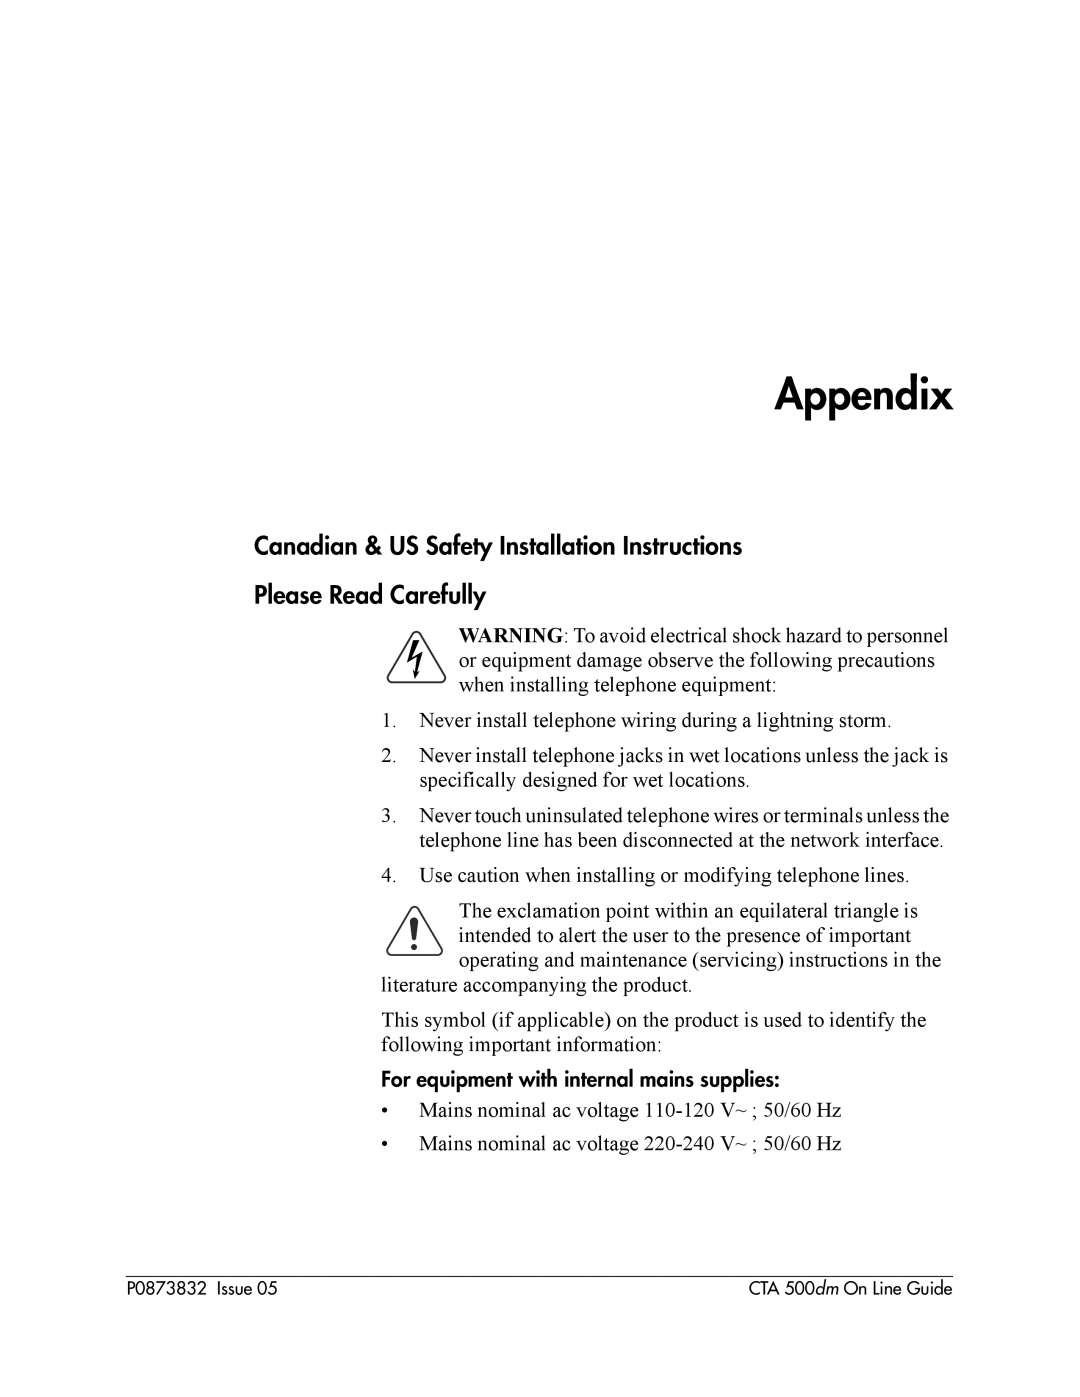 Nortel Networks CTA 500dm manual Appendix, Canadian & US Safety Installation Instructions Please Read Carefully 